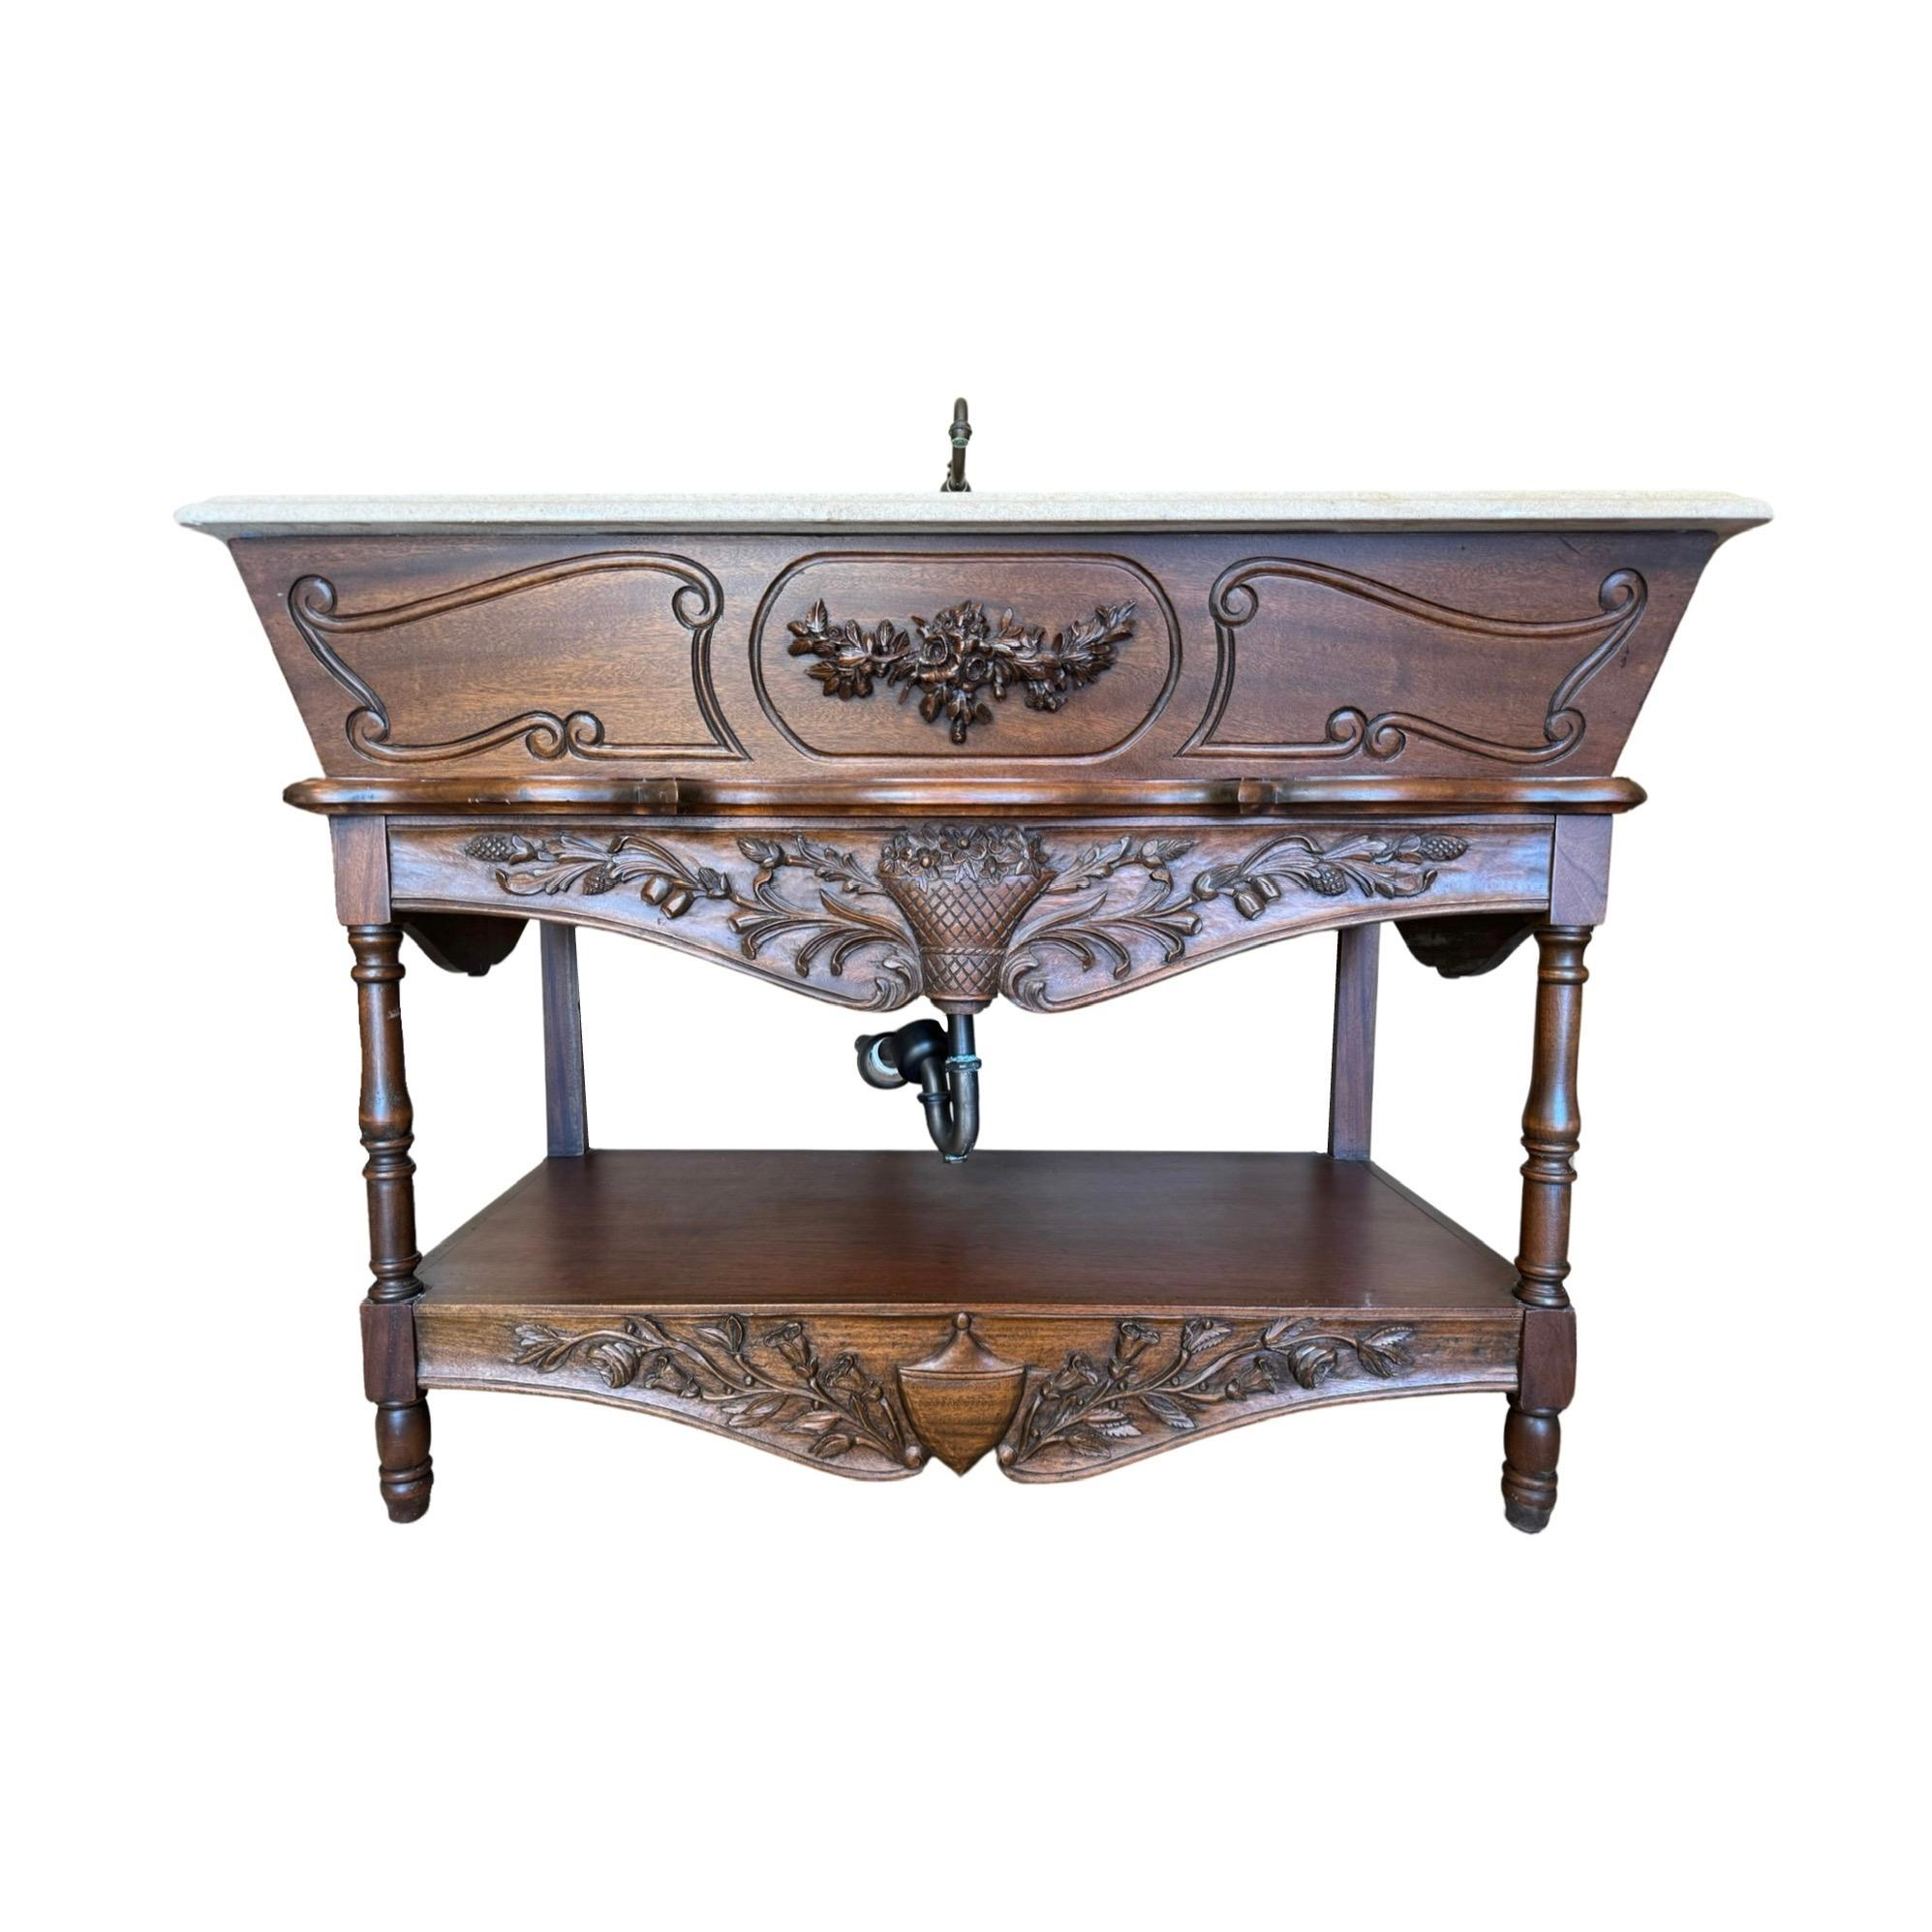 This unique 1880s French Walnut Wood and Travertine Stone Sink is a one-of-a-kind item with a stunning floral carving motif on its walnut wood base, with a travertine stone top sink base. Plus, it comes with French-made copper hardware, a matching